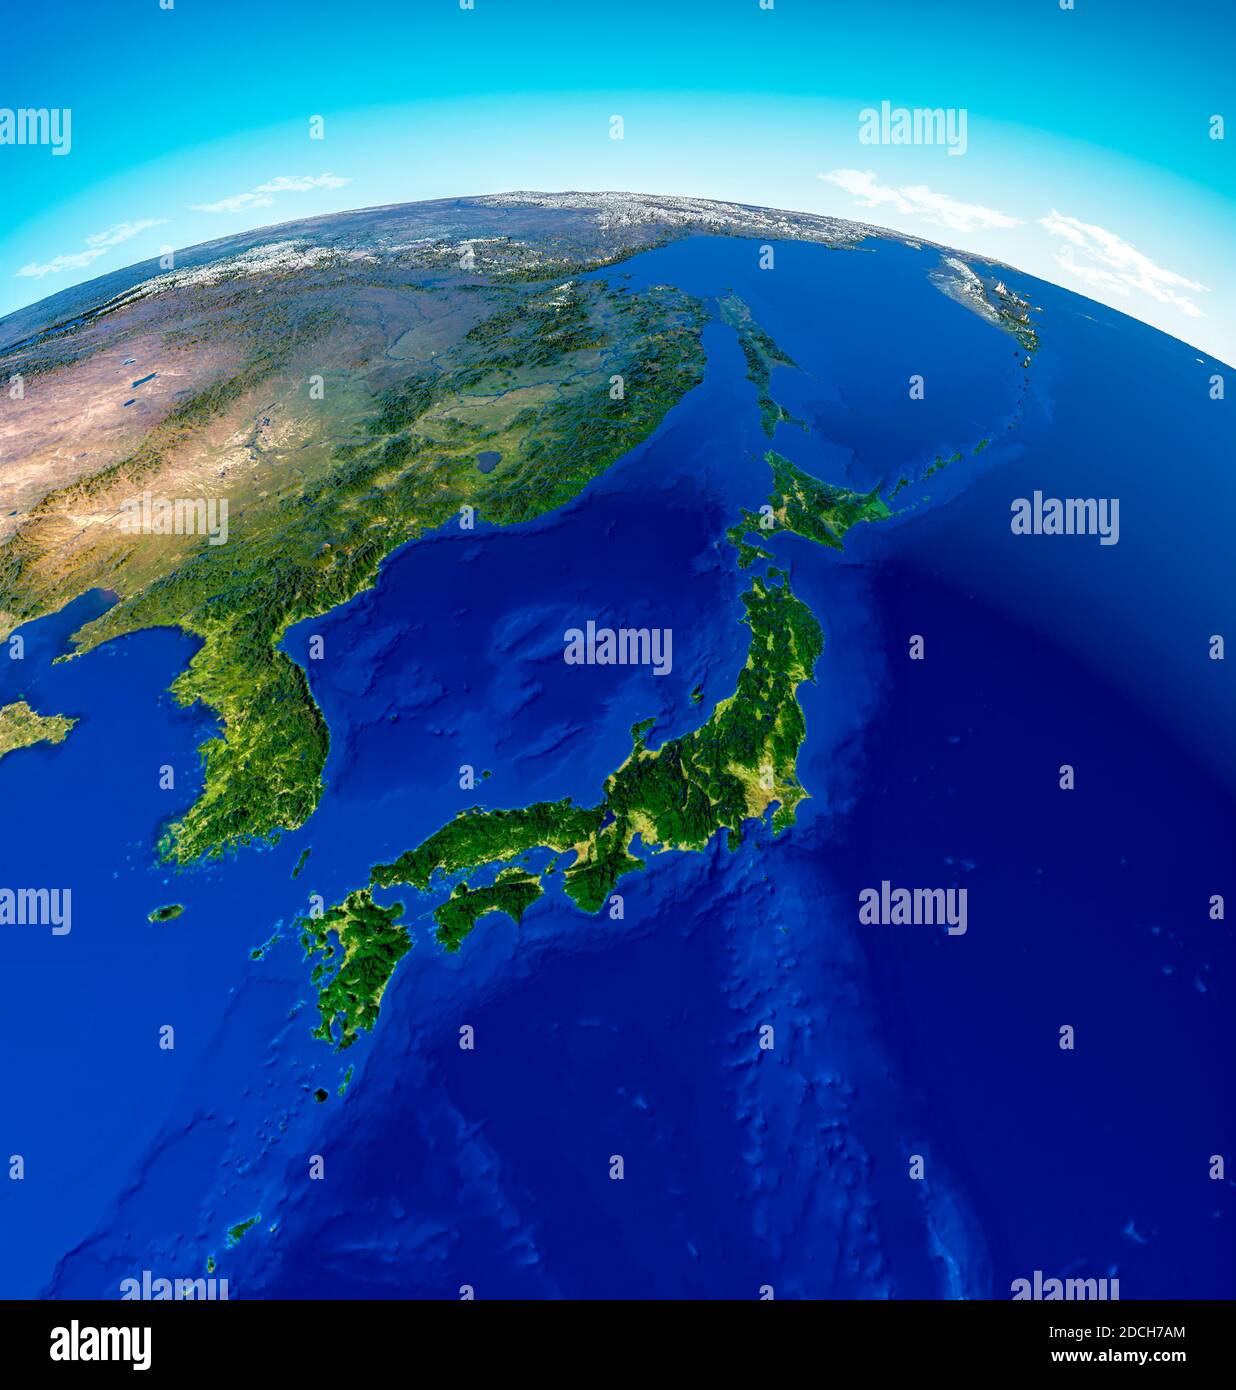 Globe map of Japan, North Korea and South Korea, physical map Asia, East Asia. Map with reliefs and mountains and Pacific Ocean, atlas, cartography Stock Photo